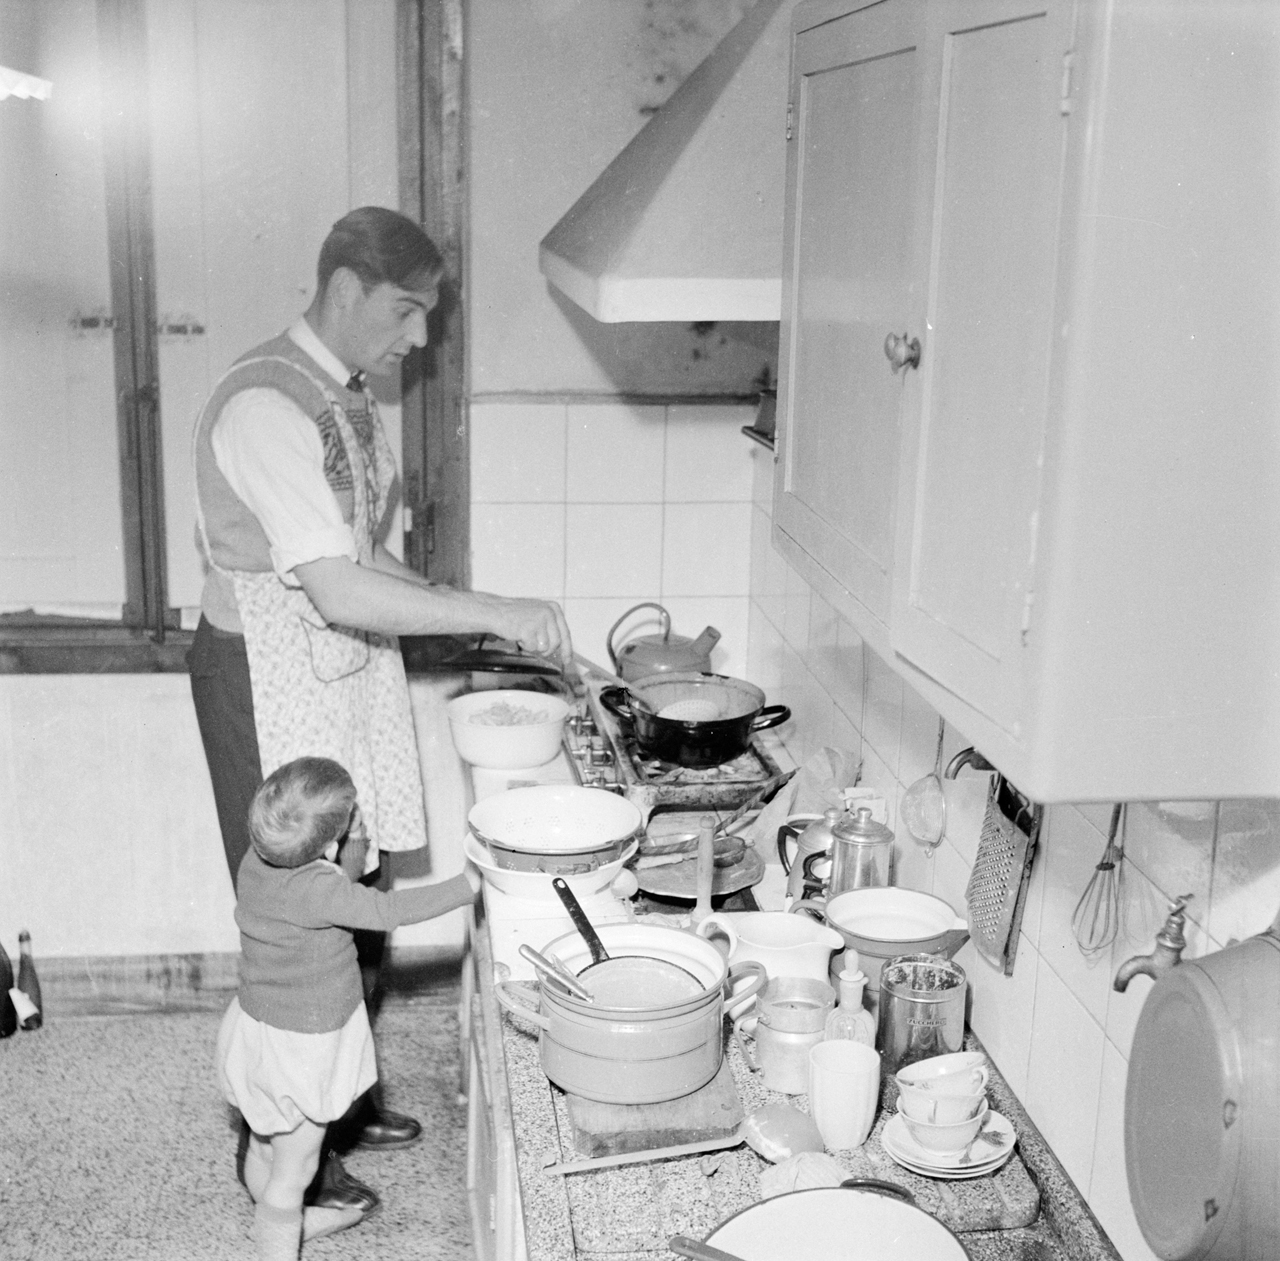 A black and white photo of a man cooking in a cluttered kitchen, with a small child tugging at his apron.